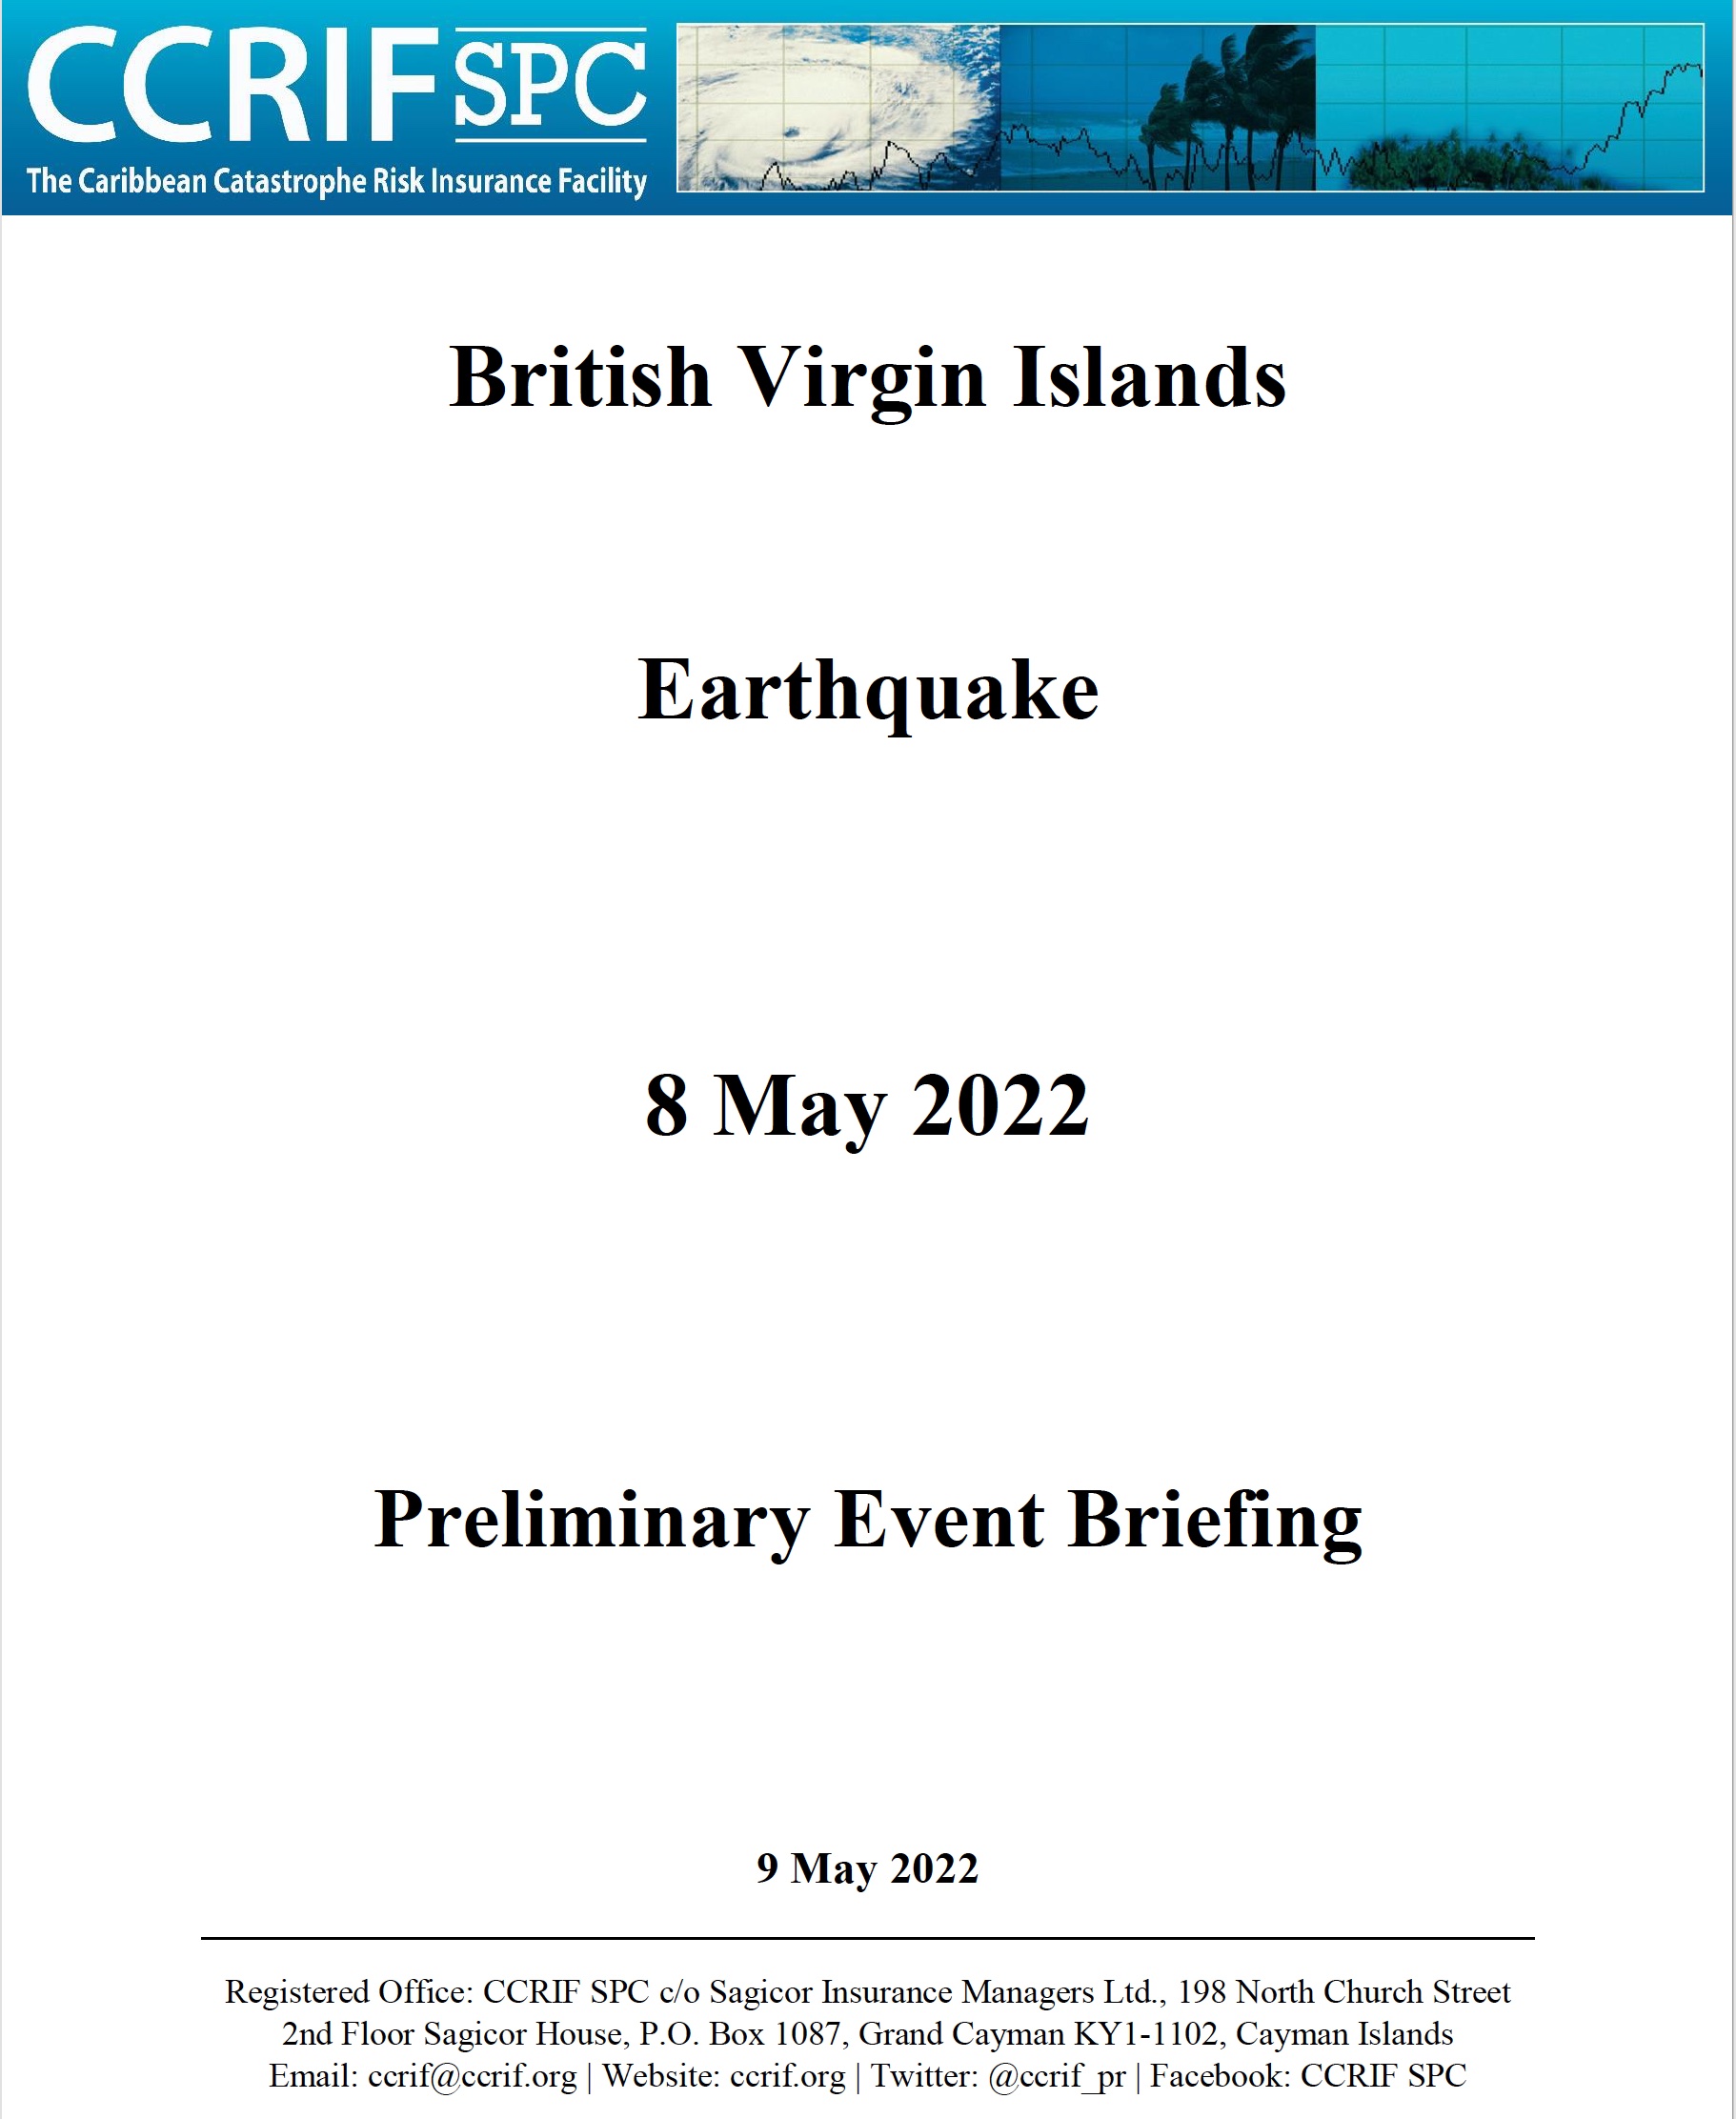 Preliminary Event Briefing - Earthquake - British Virgin Islands - May 8 2022